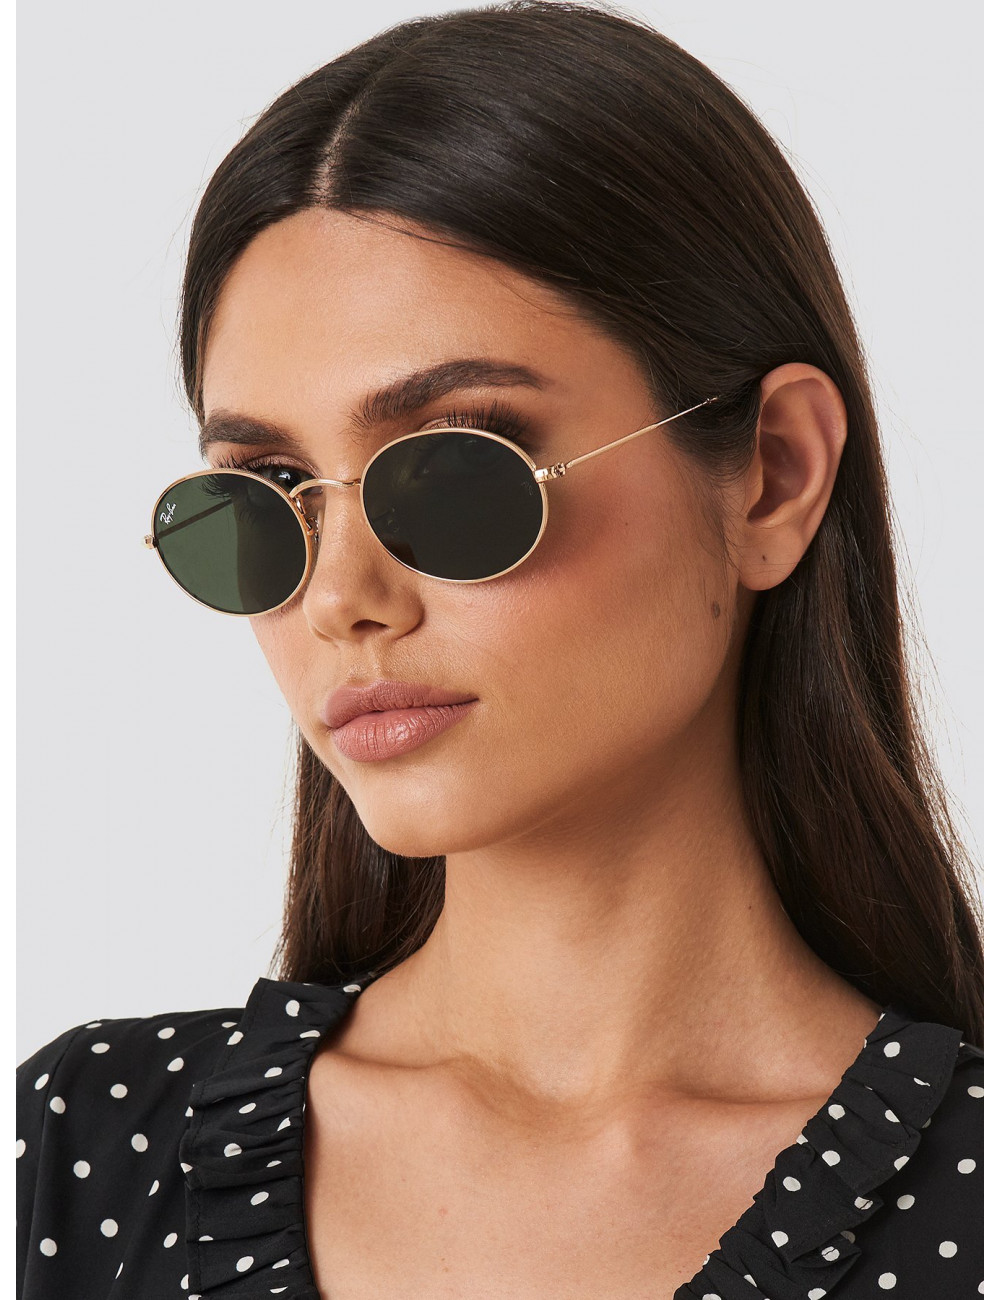 Ray Ban Oval RB1970 919631 unisex metal sunglasses – 